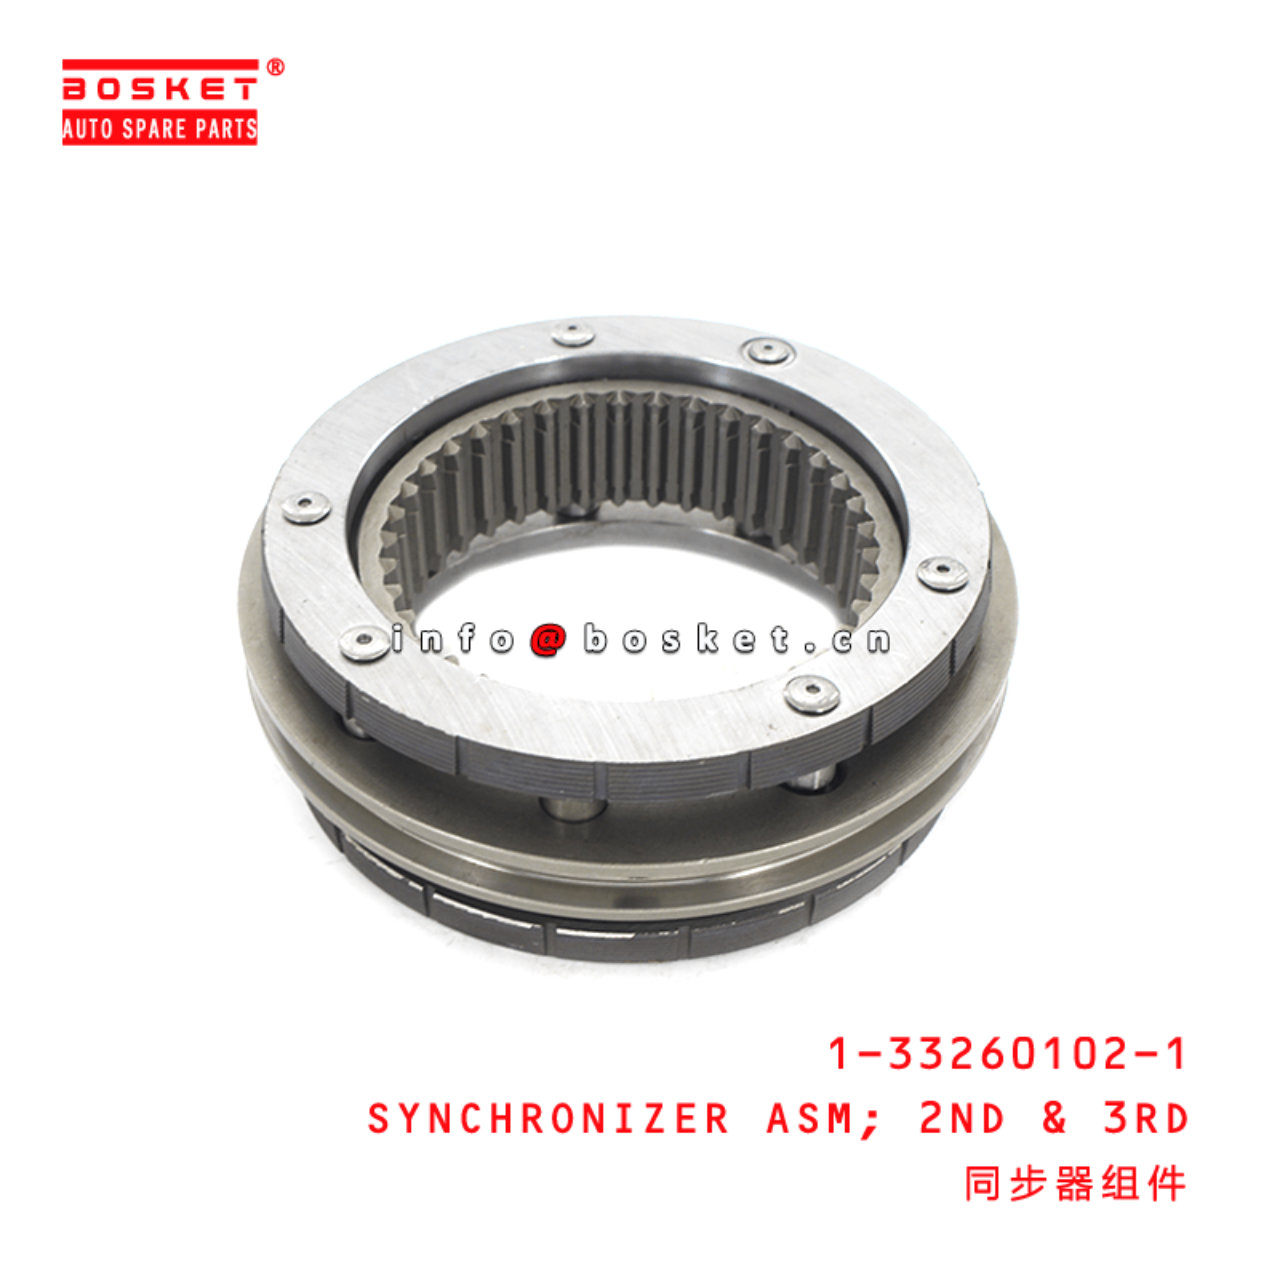 1-33260102-1 1332601021 Second & Third Synchronizer Assembly 